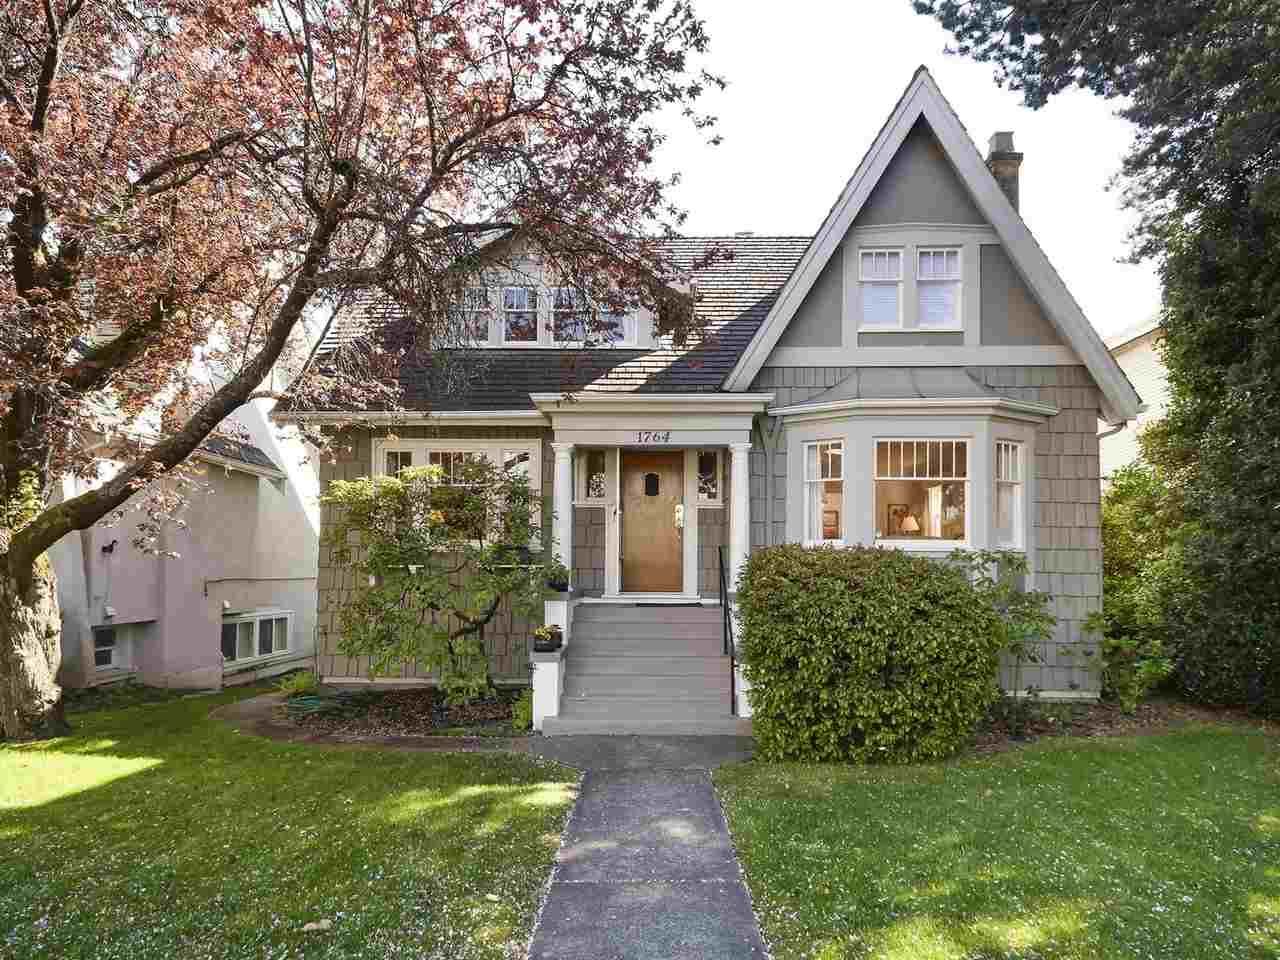 Main Photo: 1764 W 57TH Avenue in Vancouver: South Granville House for sale (Vancouver West)  : MLS®# R2366542